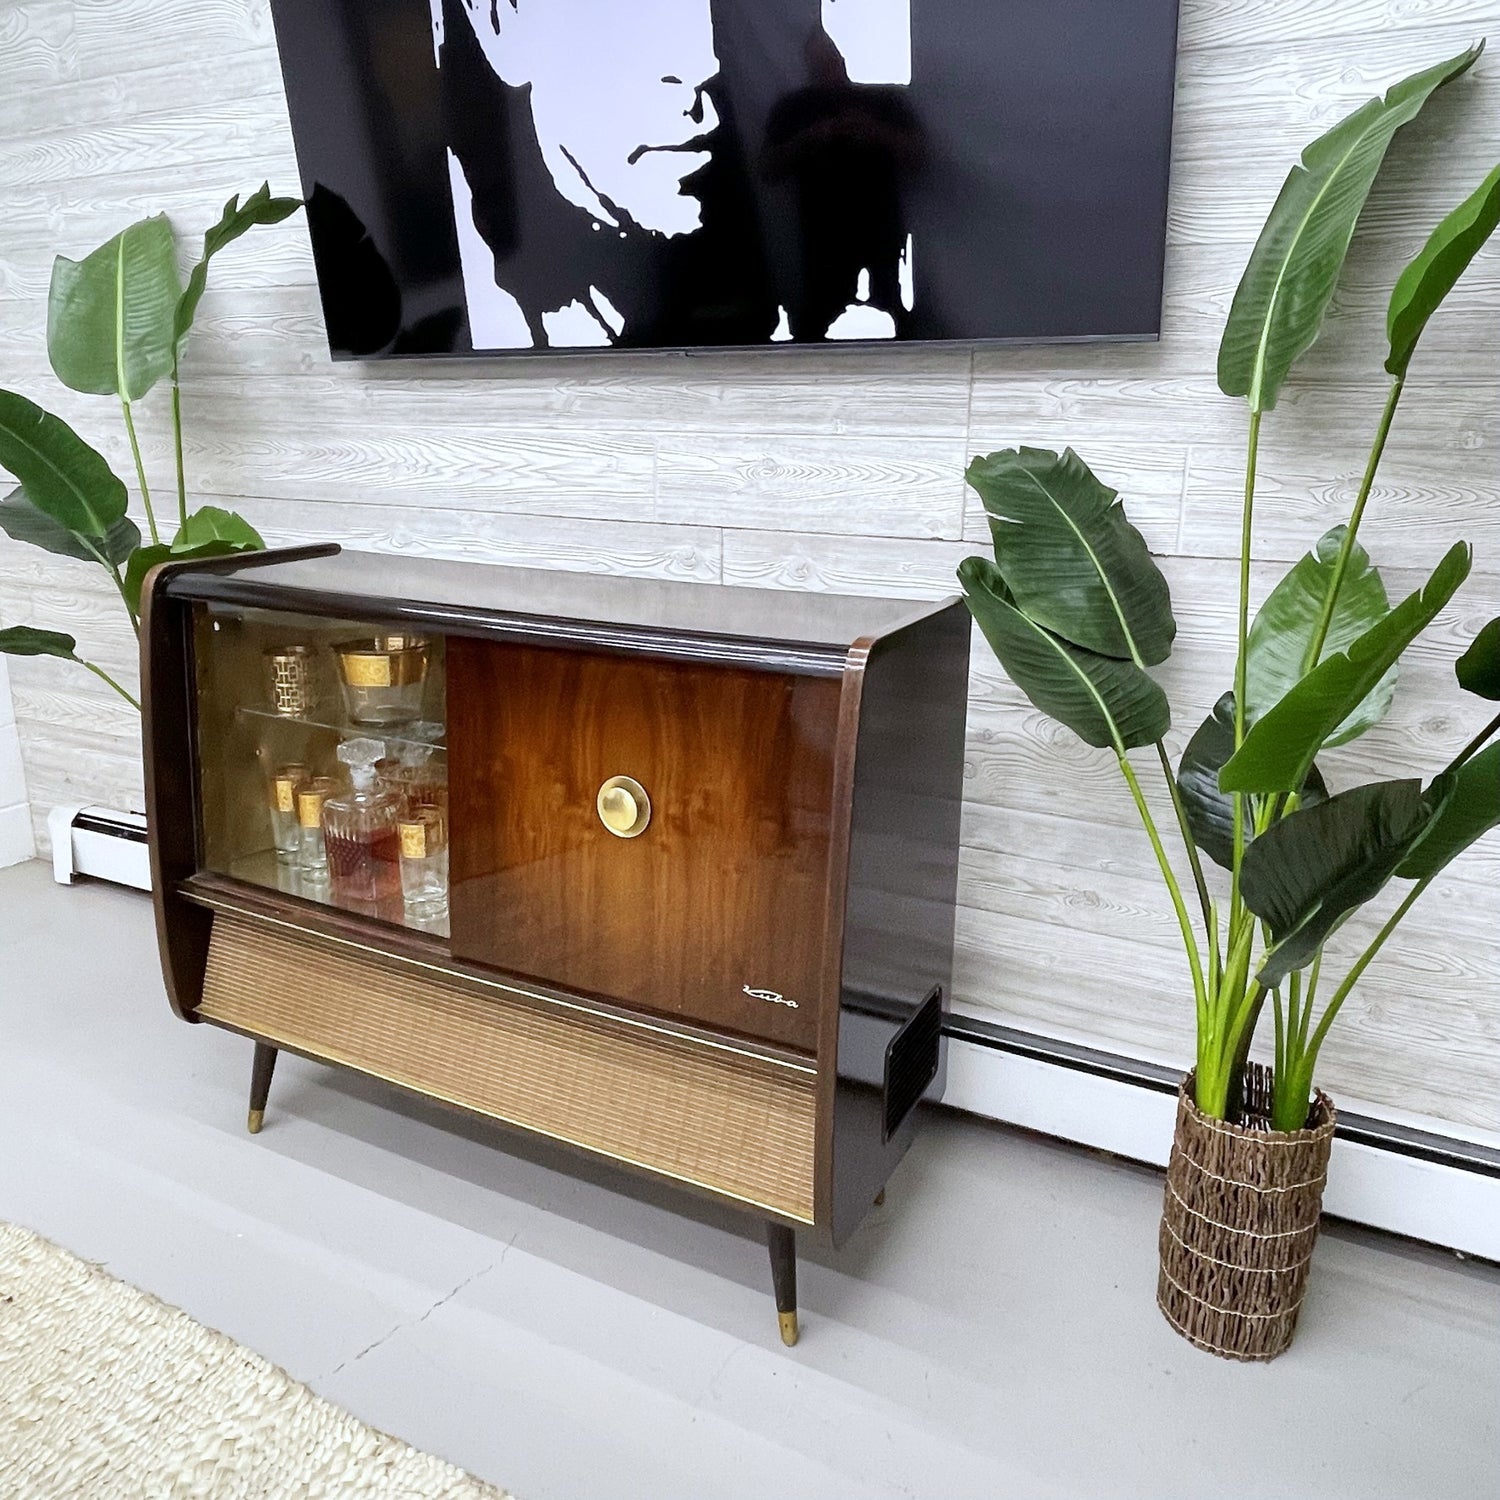 KUBA 50s Mid Century Stereo Console Record Player Changer w/Whiskey Bar Cabinet - AM FM Bluetooth Alexa The Vintedge Co.